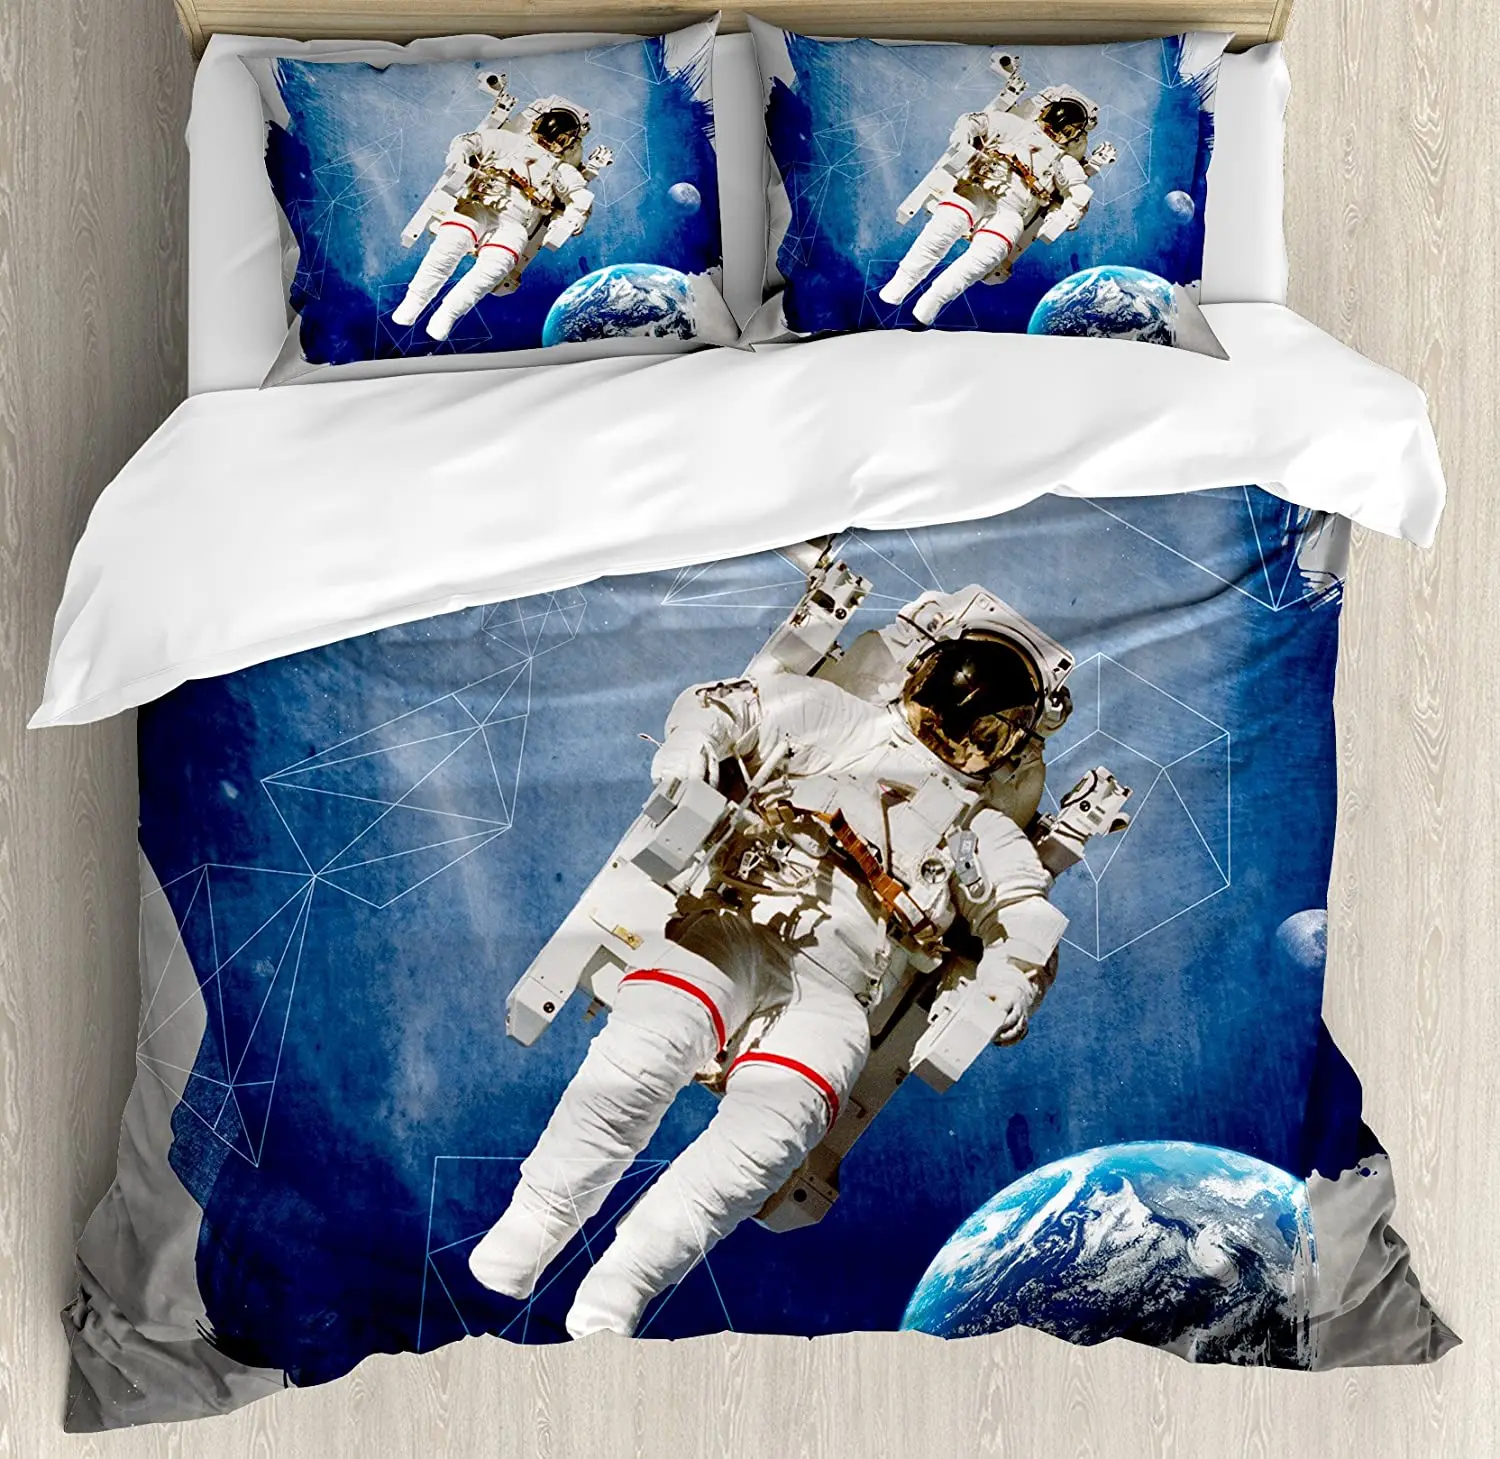 

Galaxy Bedding Set For Bedroom Bed Home Artsy Grunge Astronaut and Planet Earth with Geome Duvet Cover Quilt Cover Pillowcase